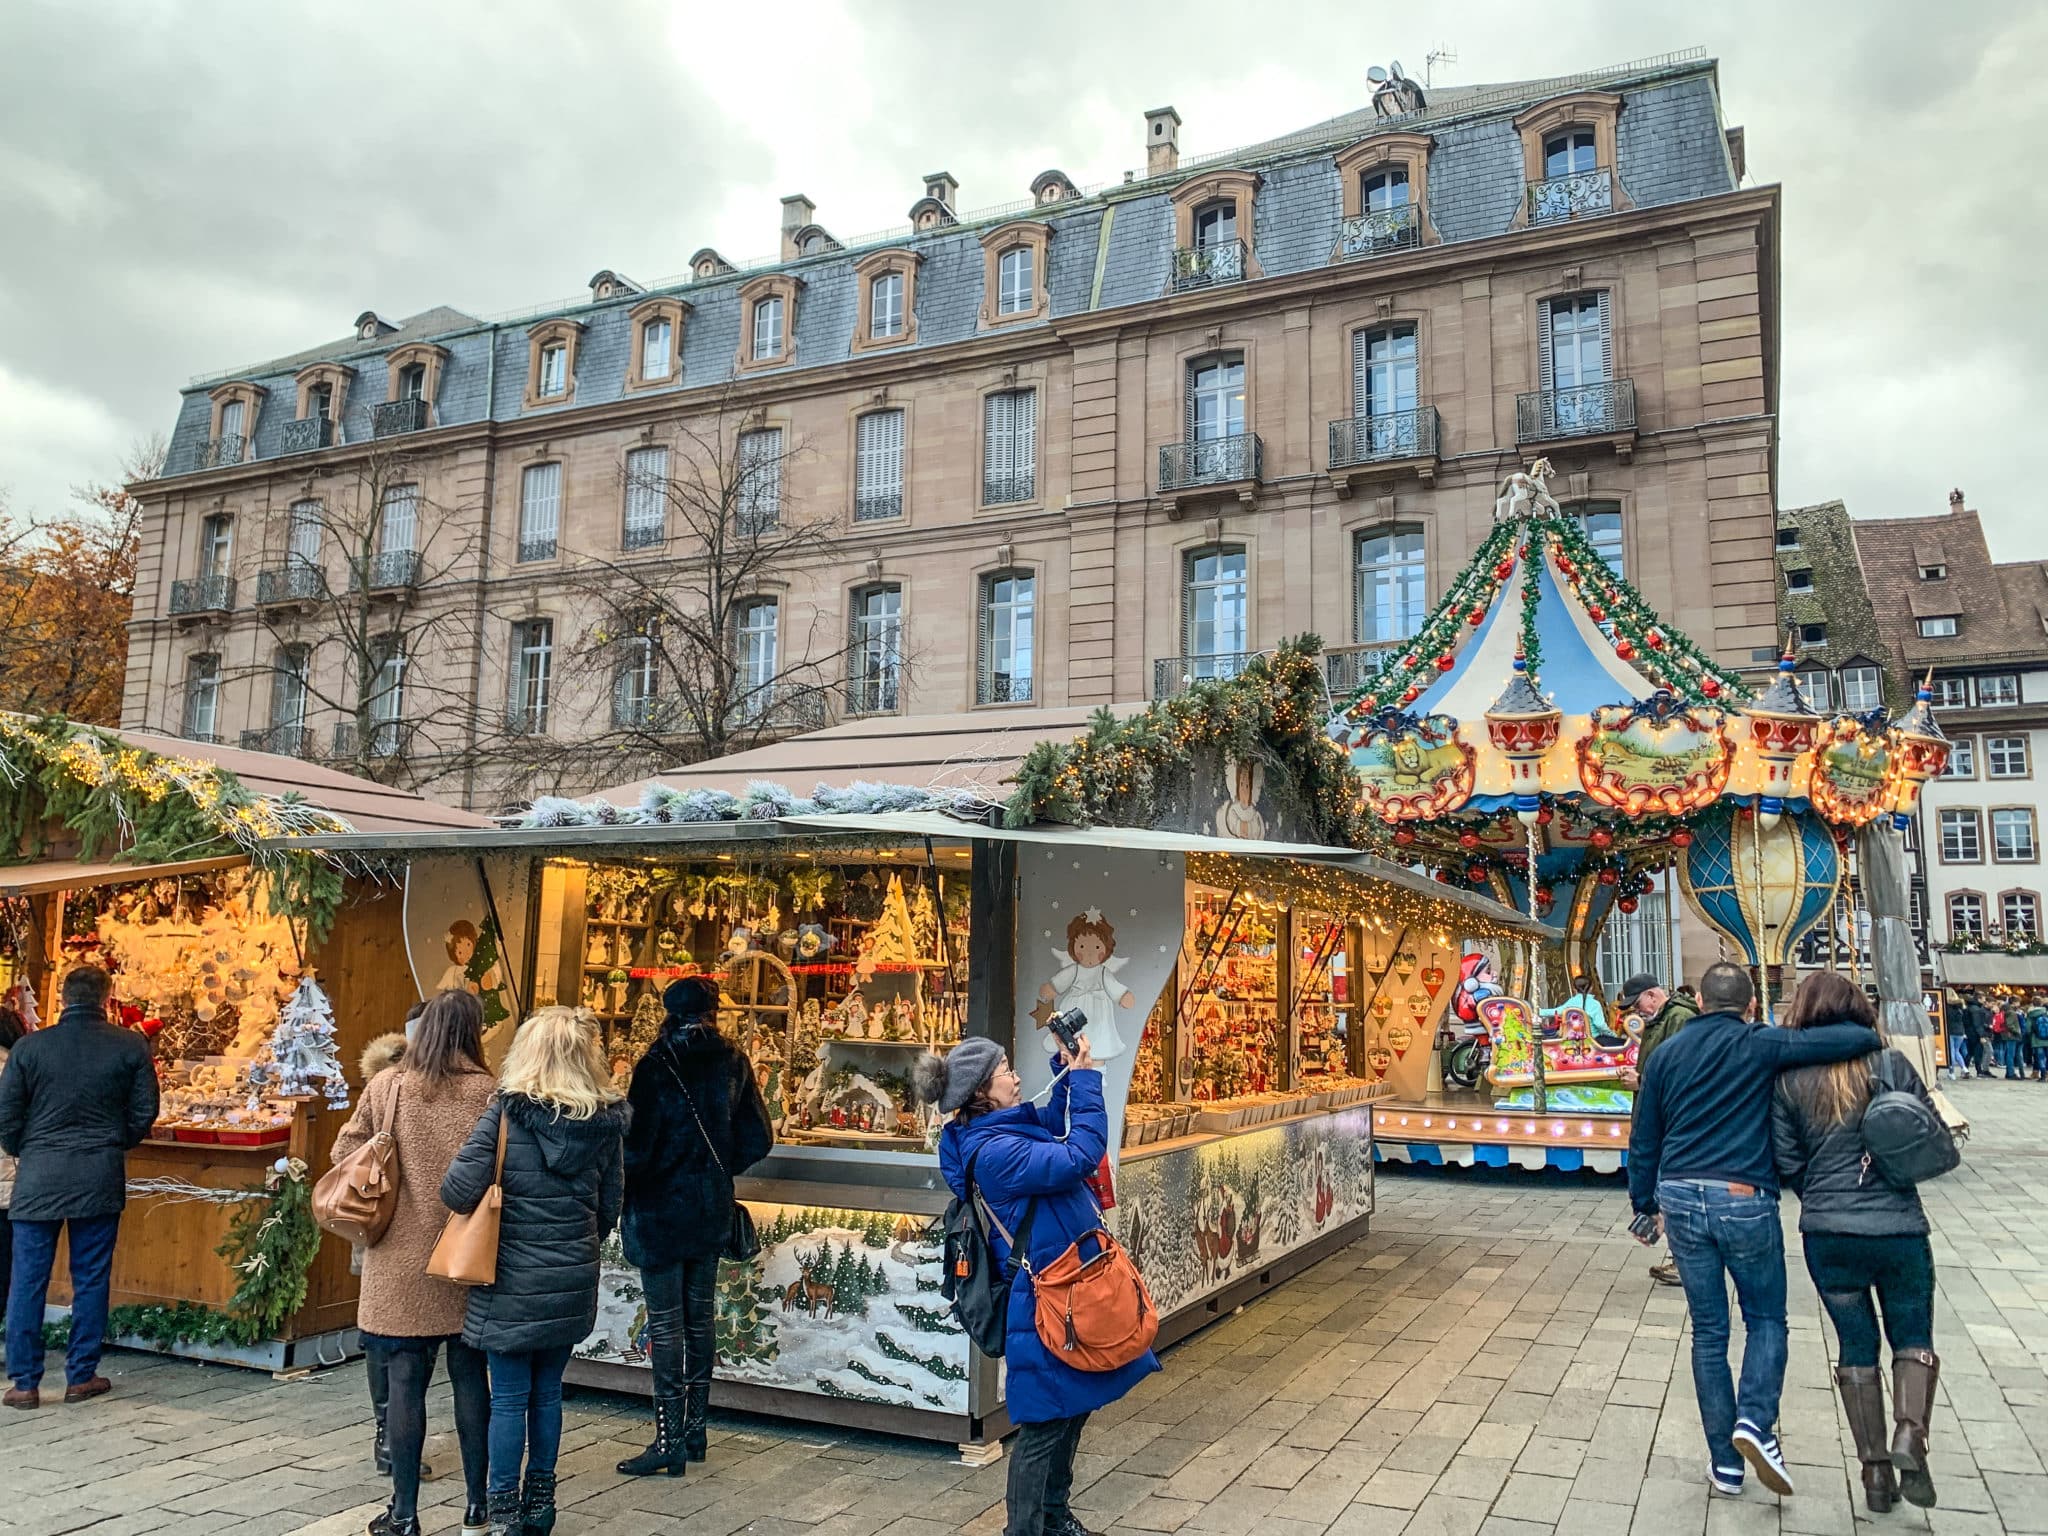 Christmas market stalls in a square in Strasbourg, France